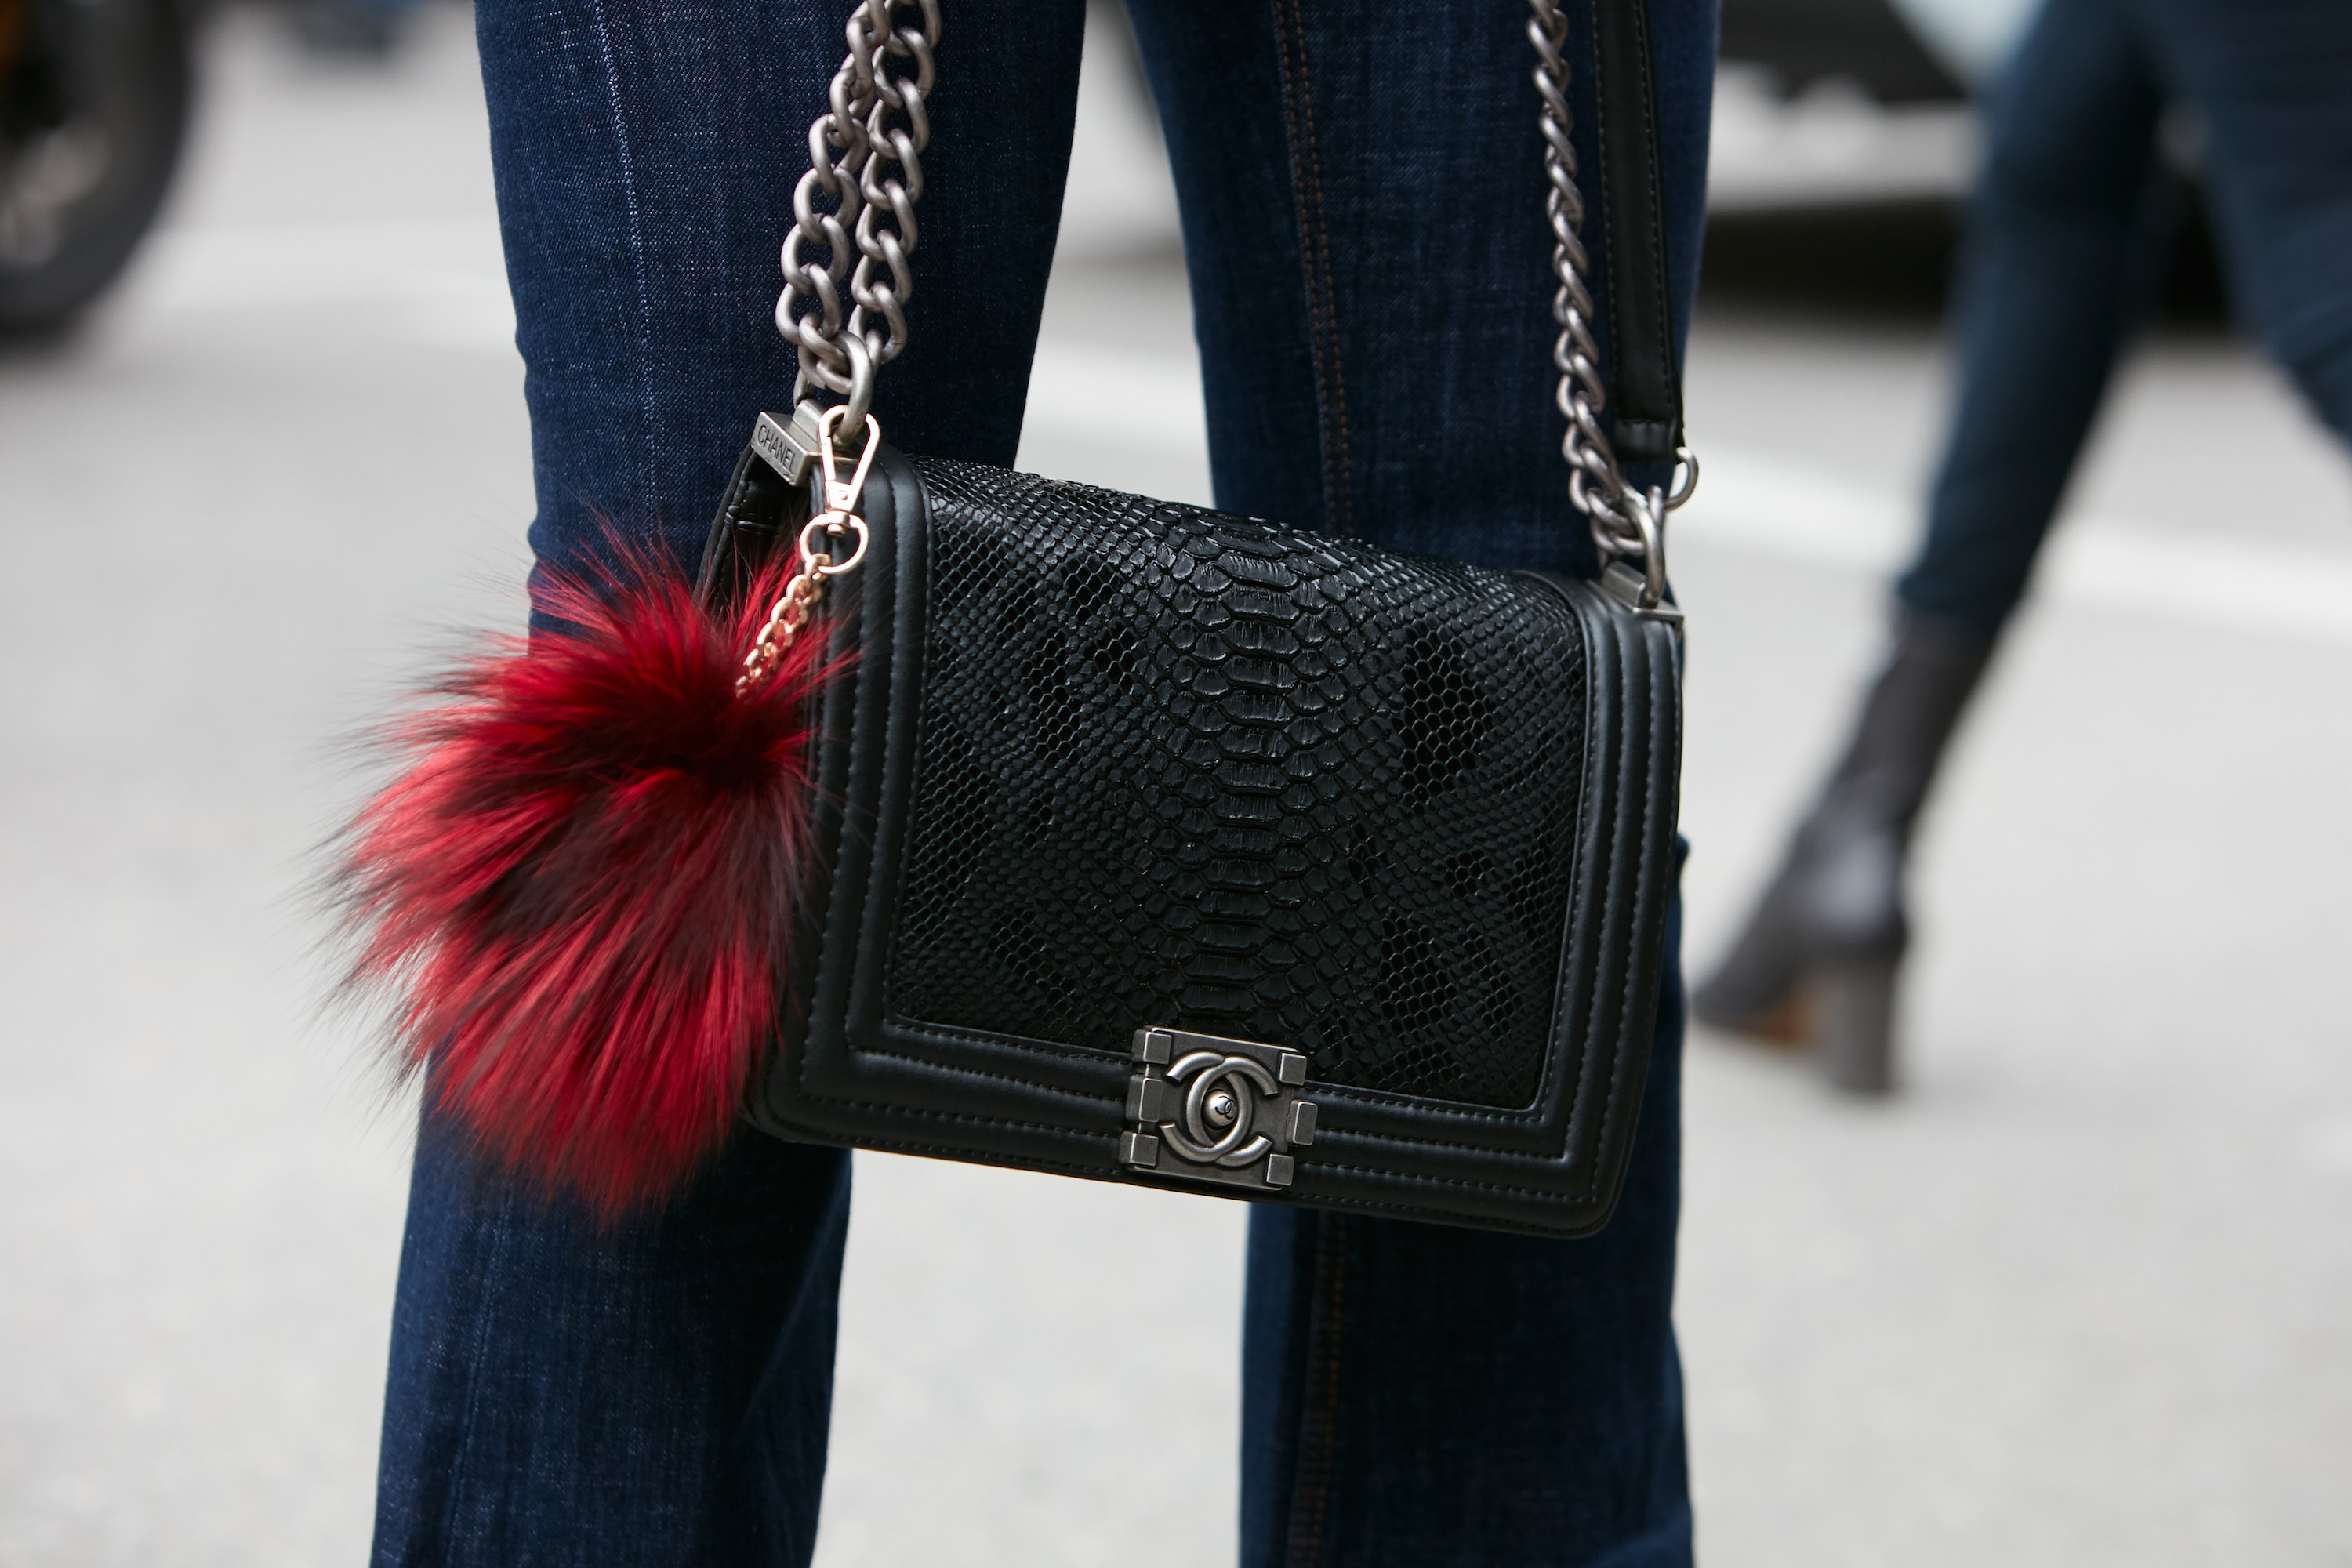 Chanel Is Banning Exotic Skins and Fur from Future Collections